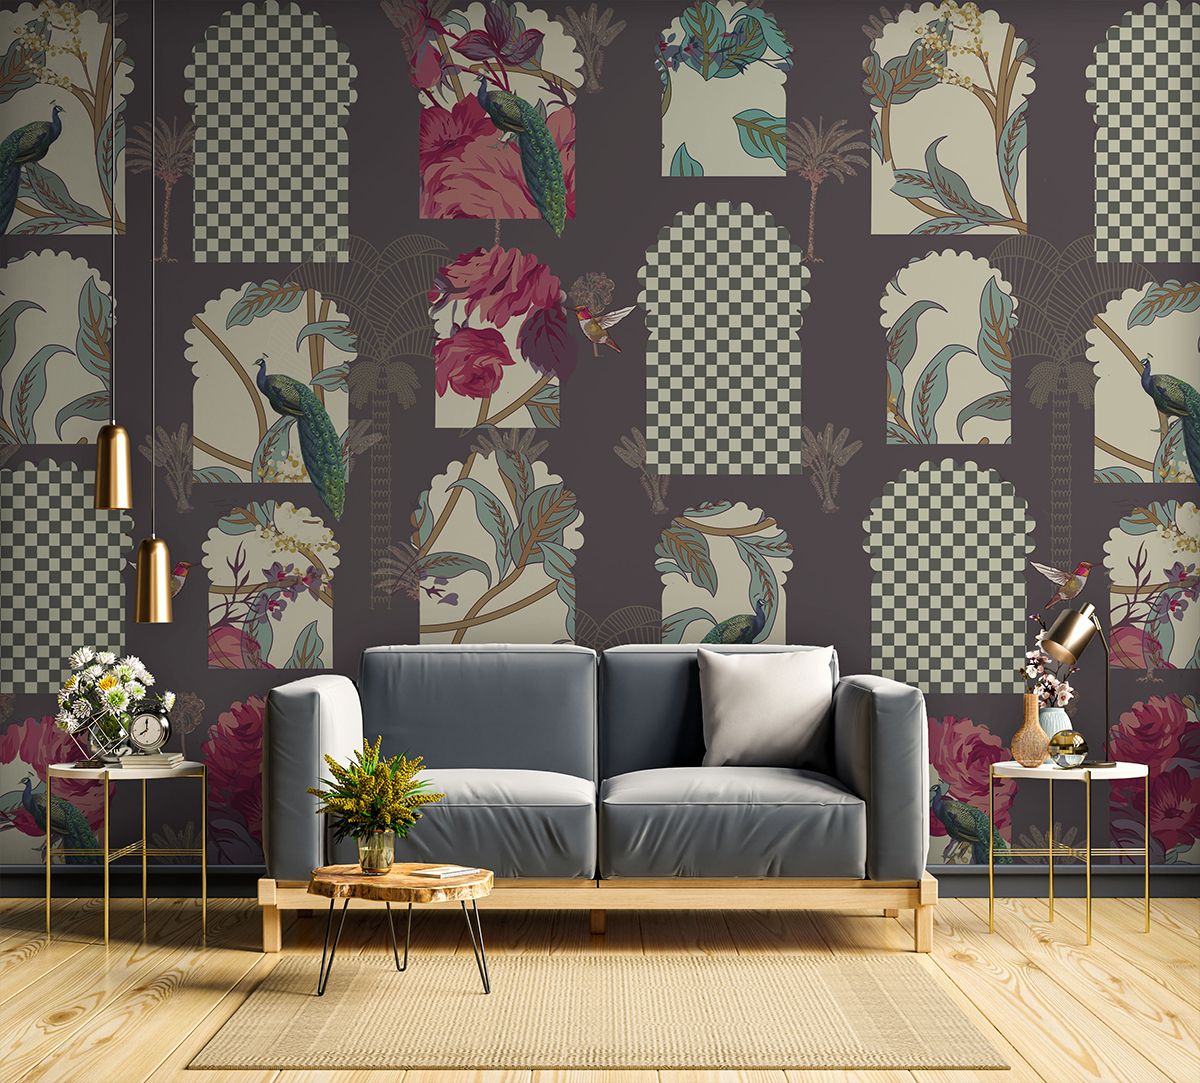 Décor Clickbait These Wallpaper Designs Have a Place in Your Home